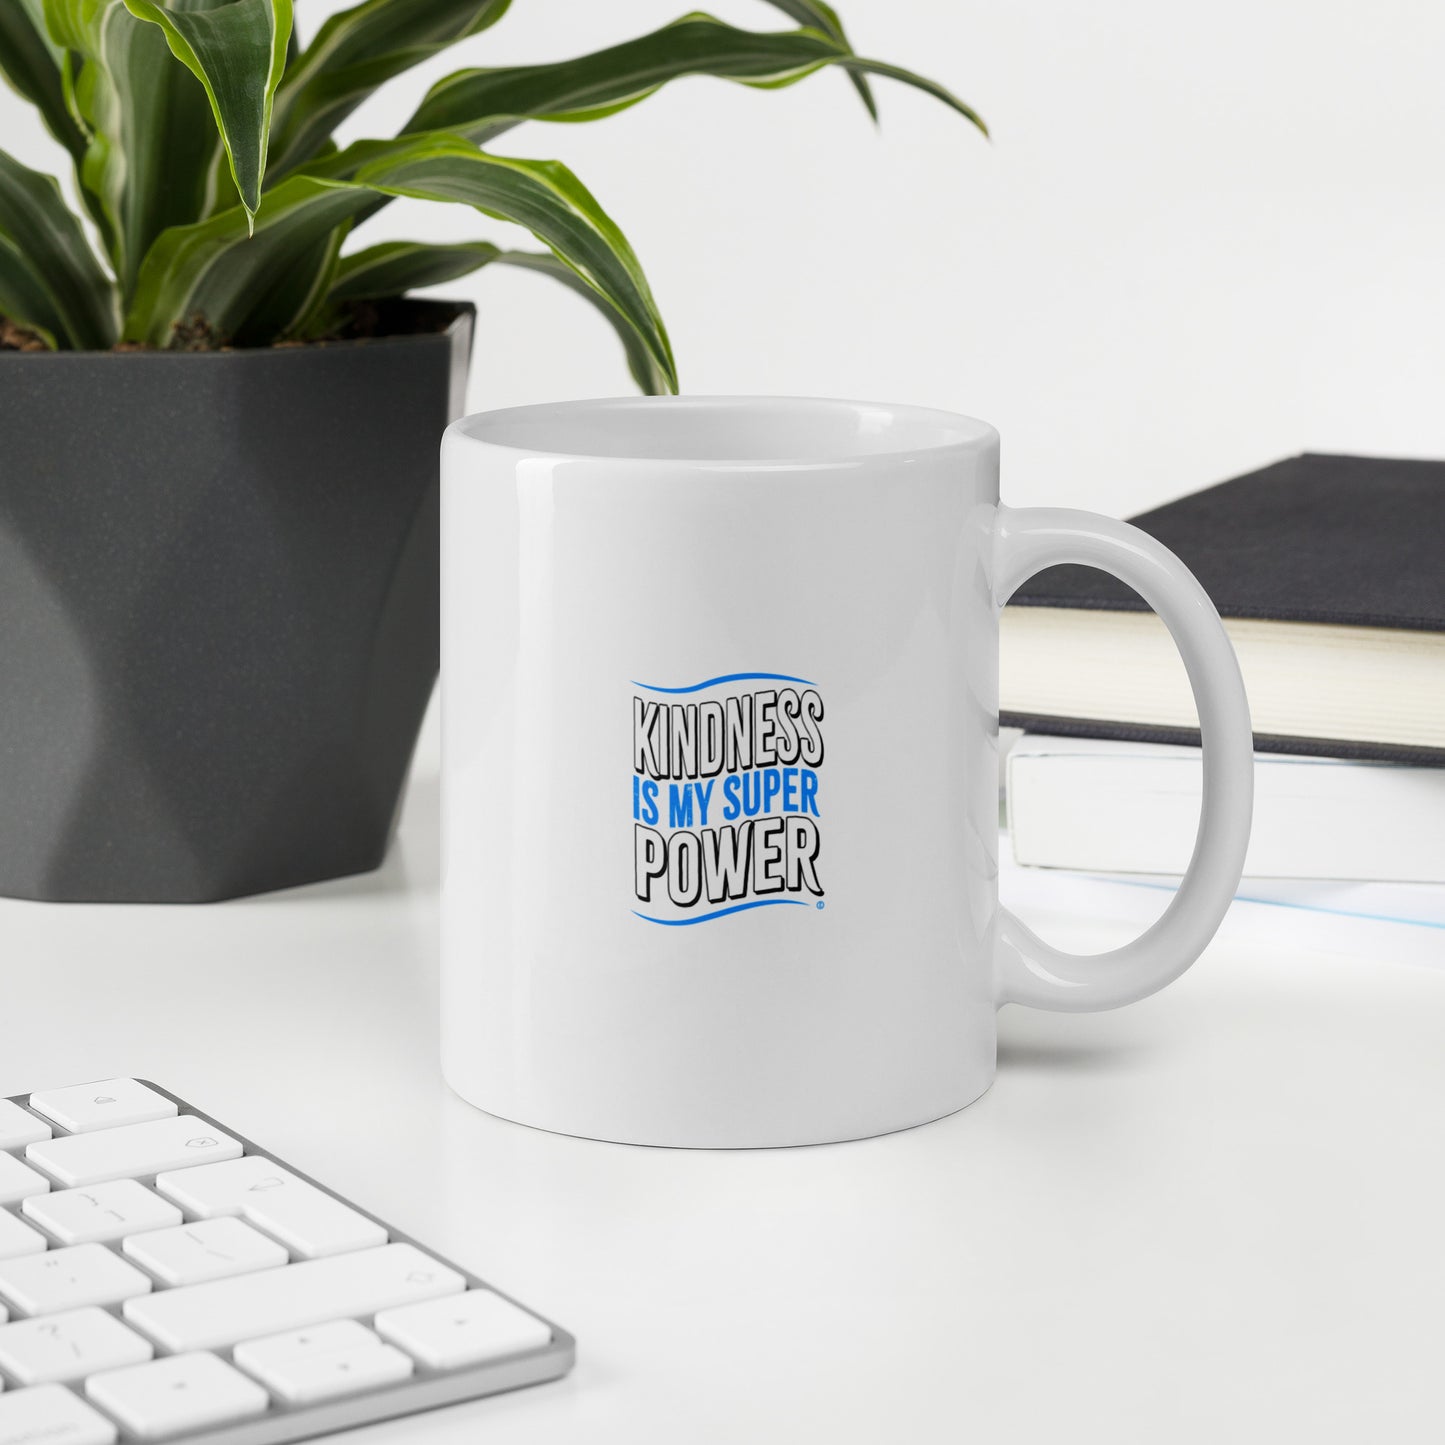 Kindness is my Superpower White Glossy Mugs